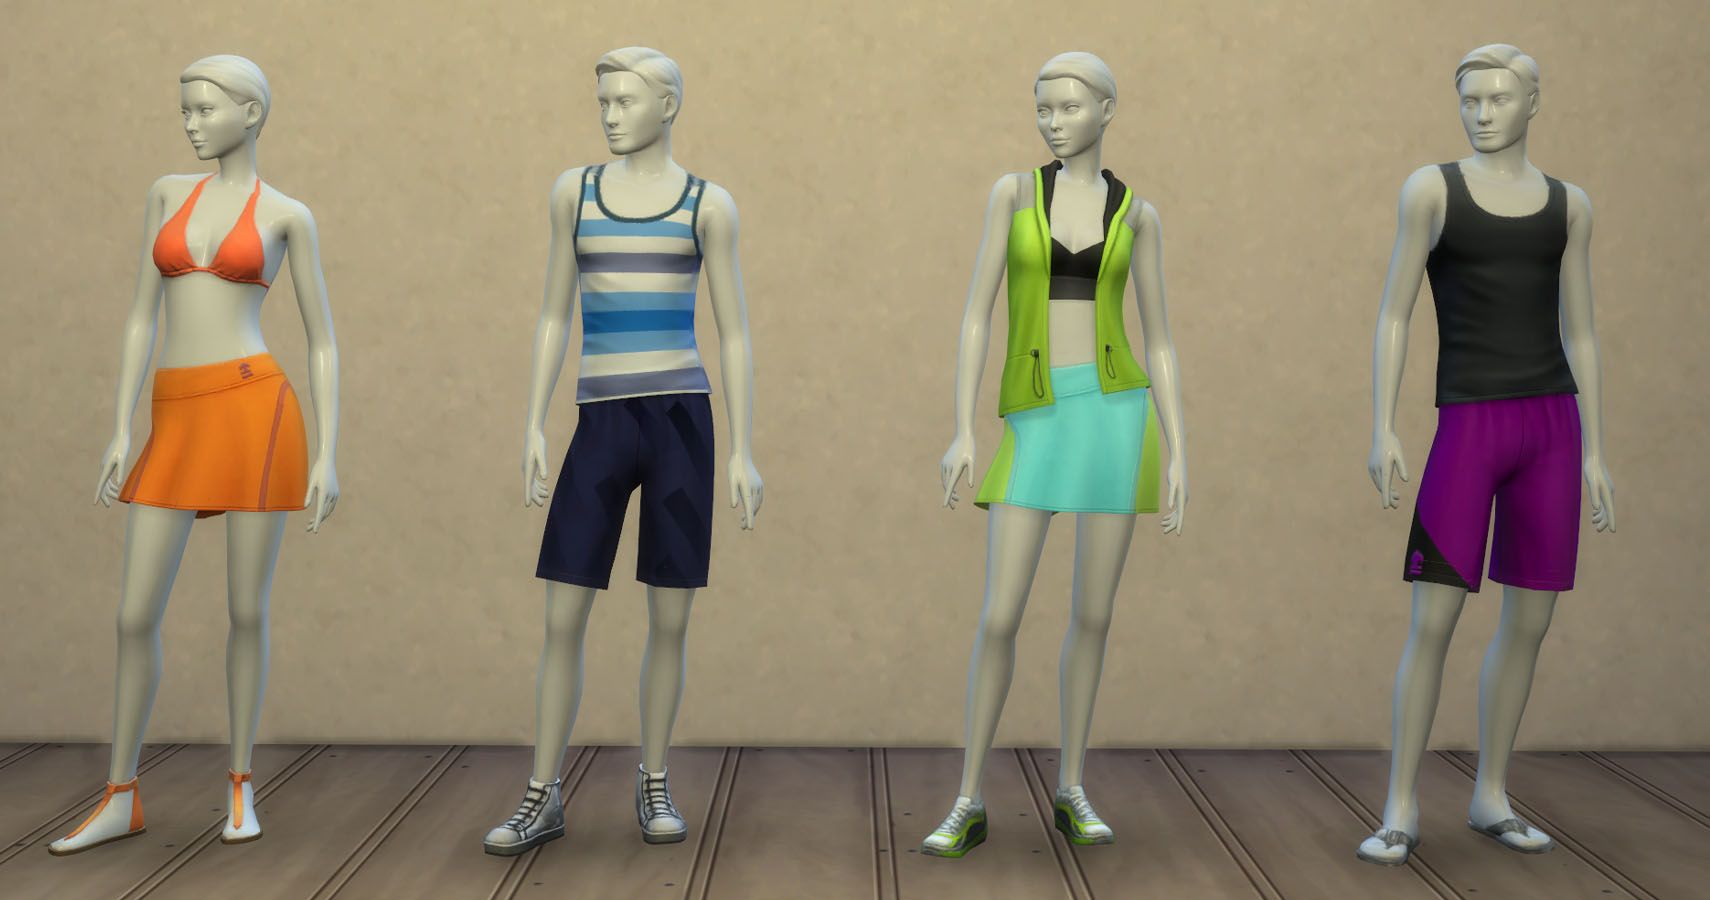 The Sims 4 Fitness Stuff: A Day in the Life